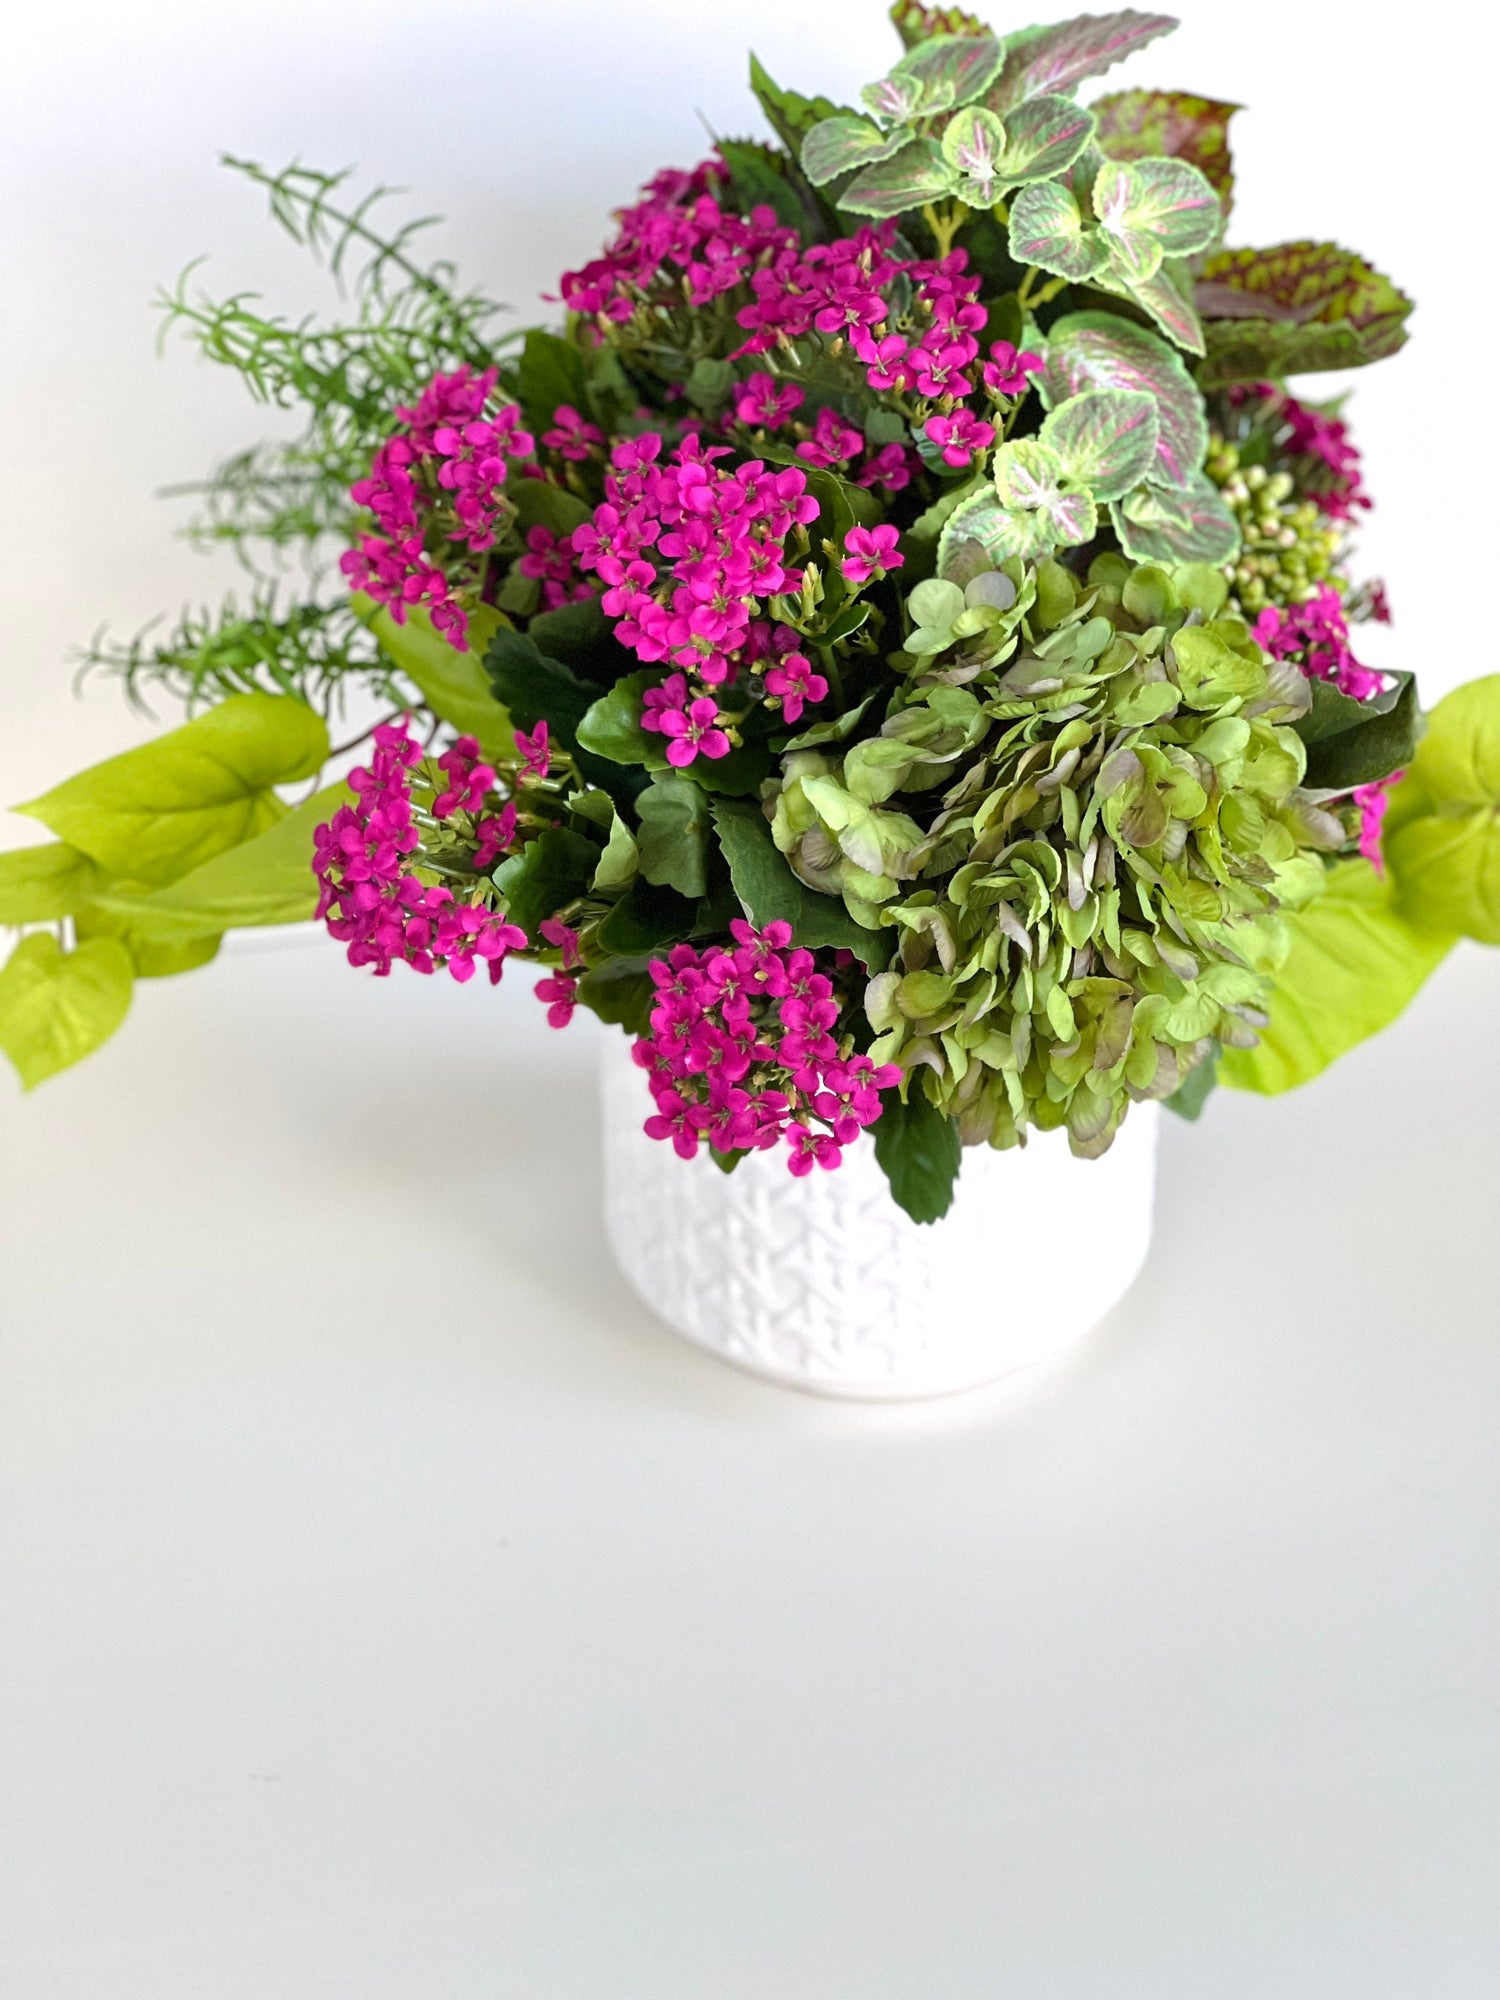 Green and fuchsia lifelike floral arrangement in white ceramic cane embossed planter